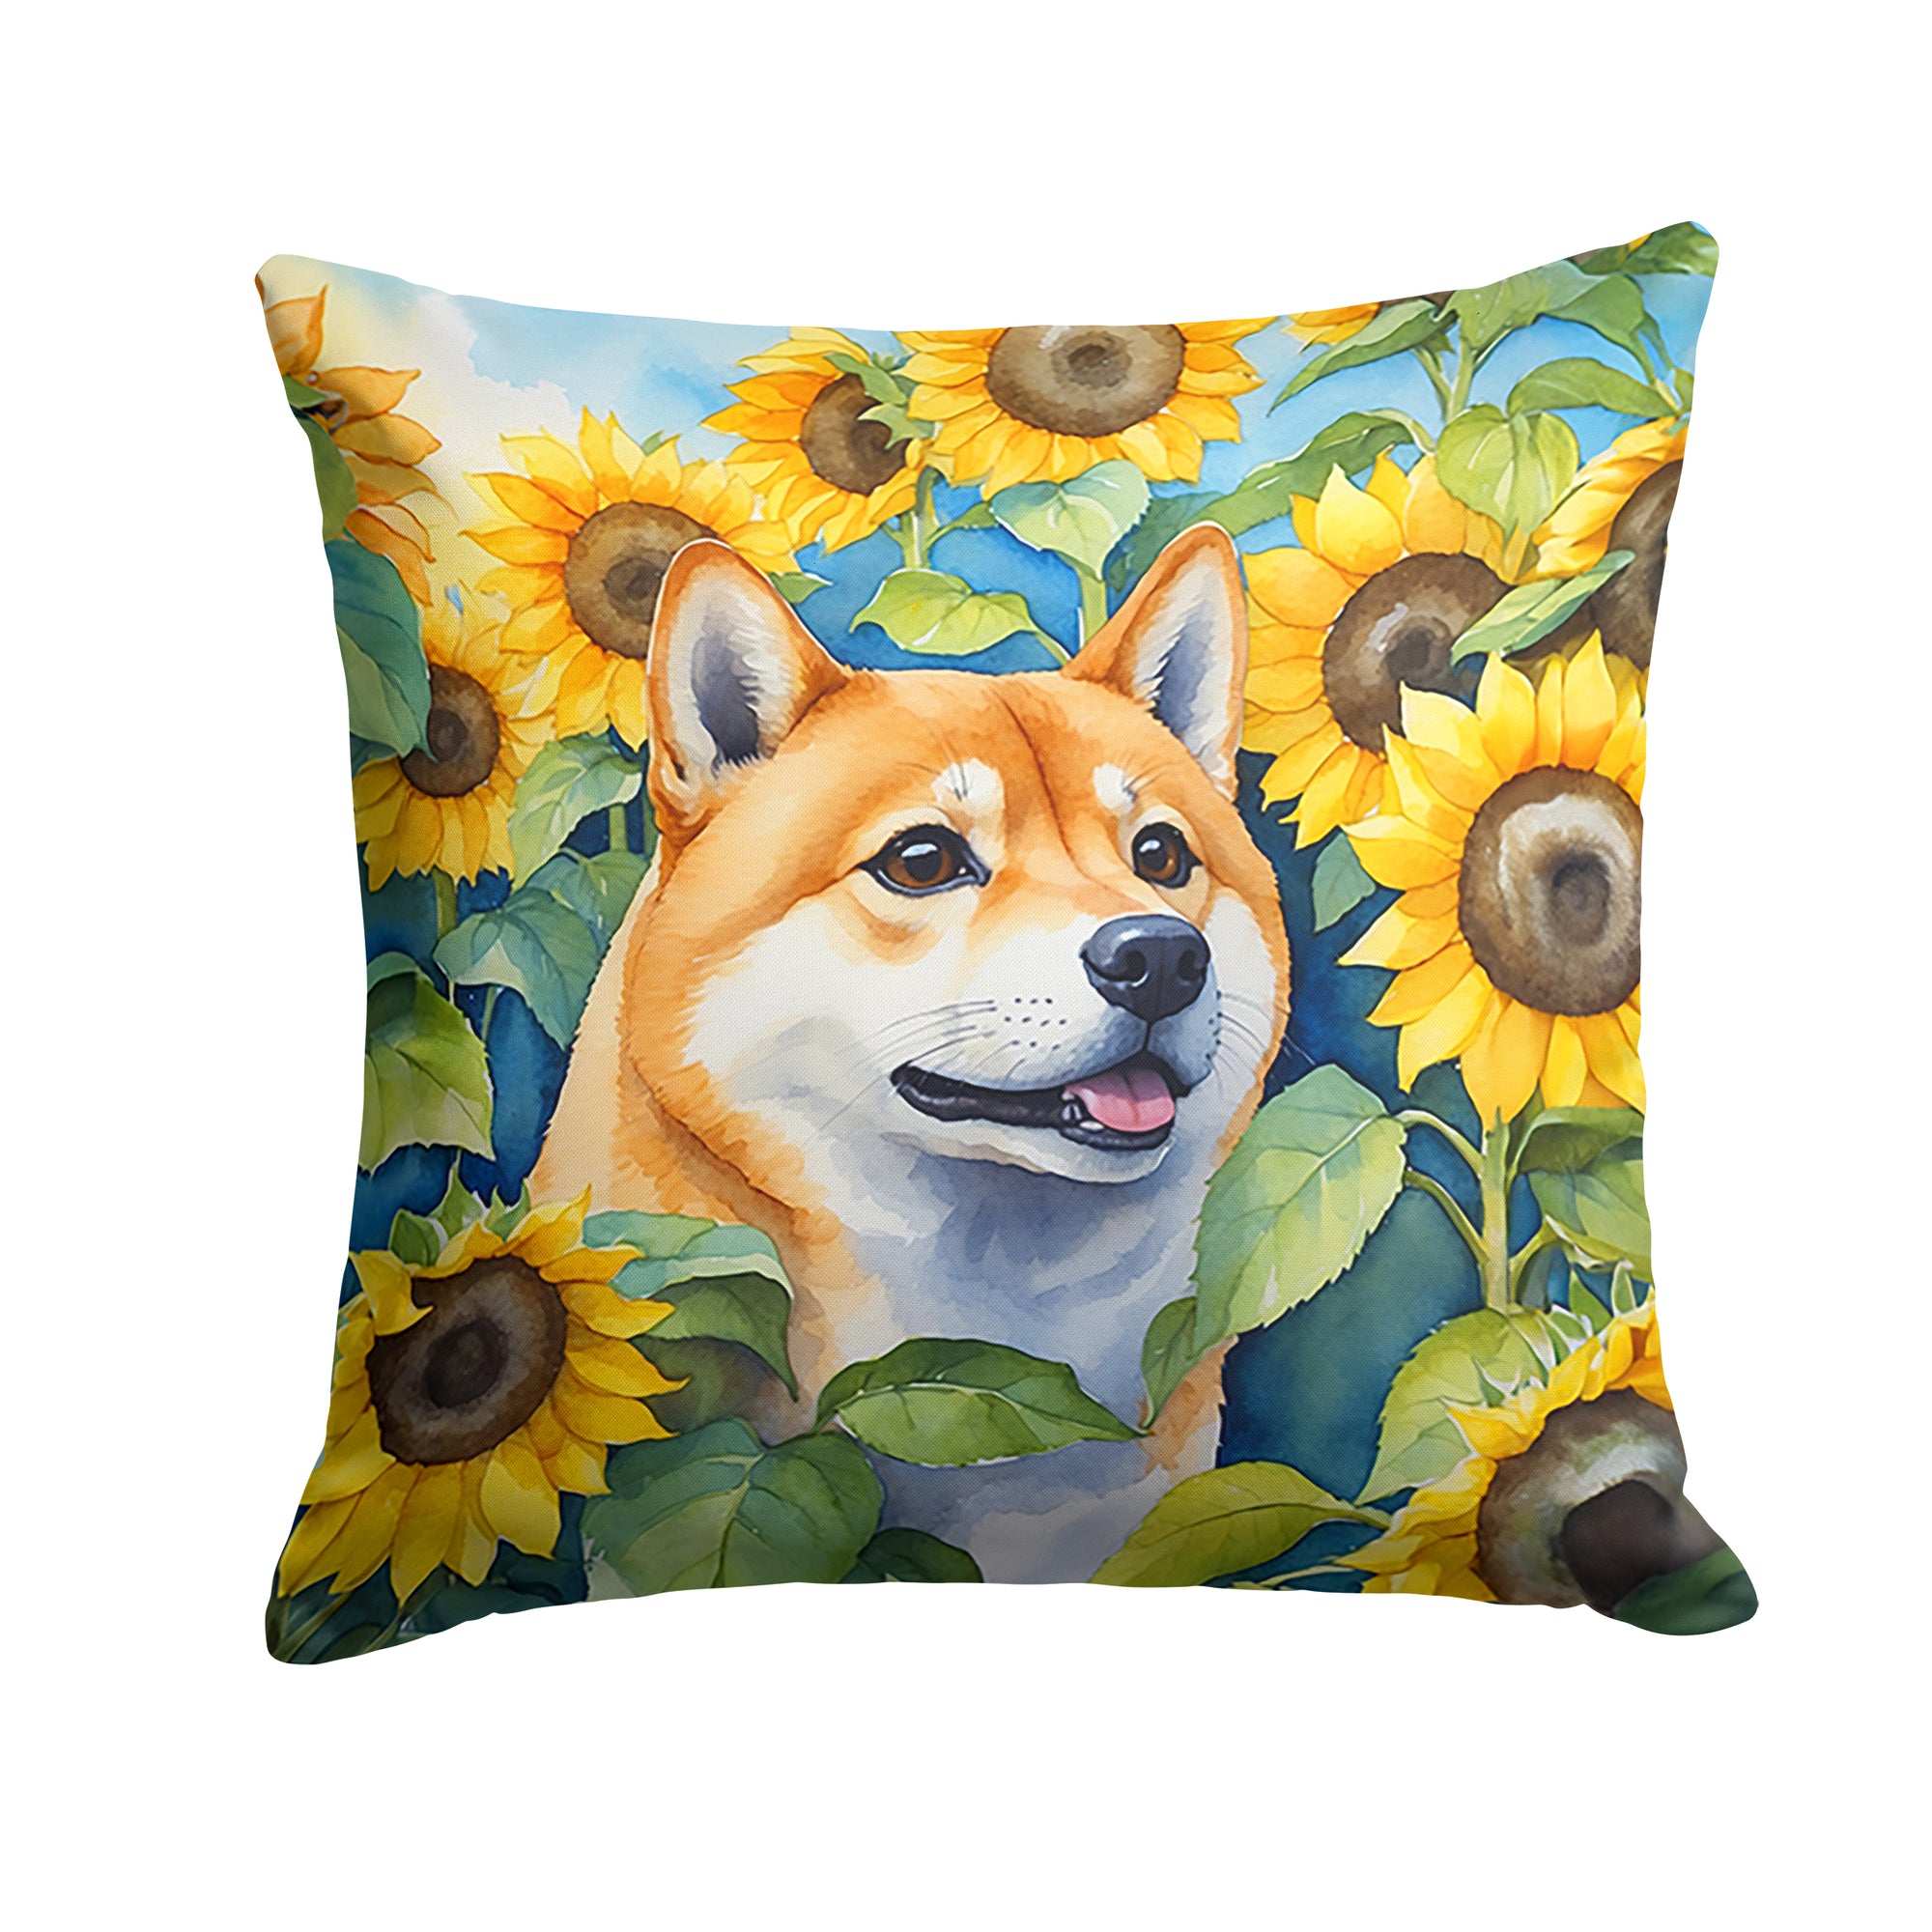 Buy this Shiba Inu in Sunflowers Throw Pillow